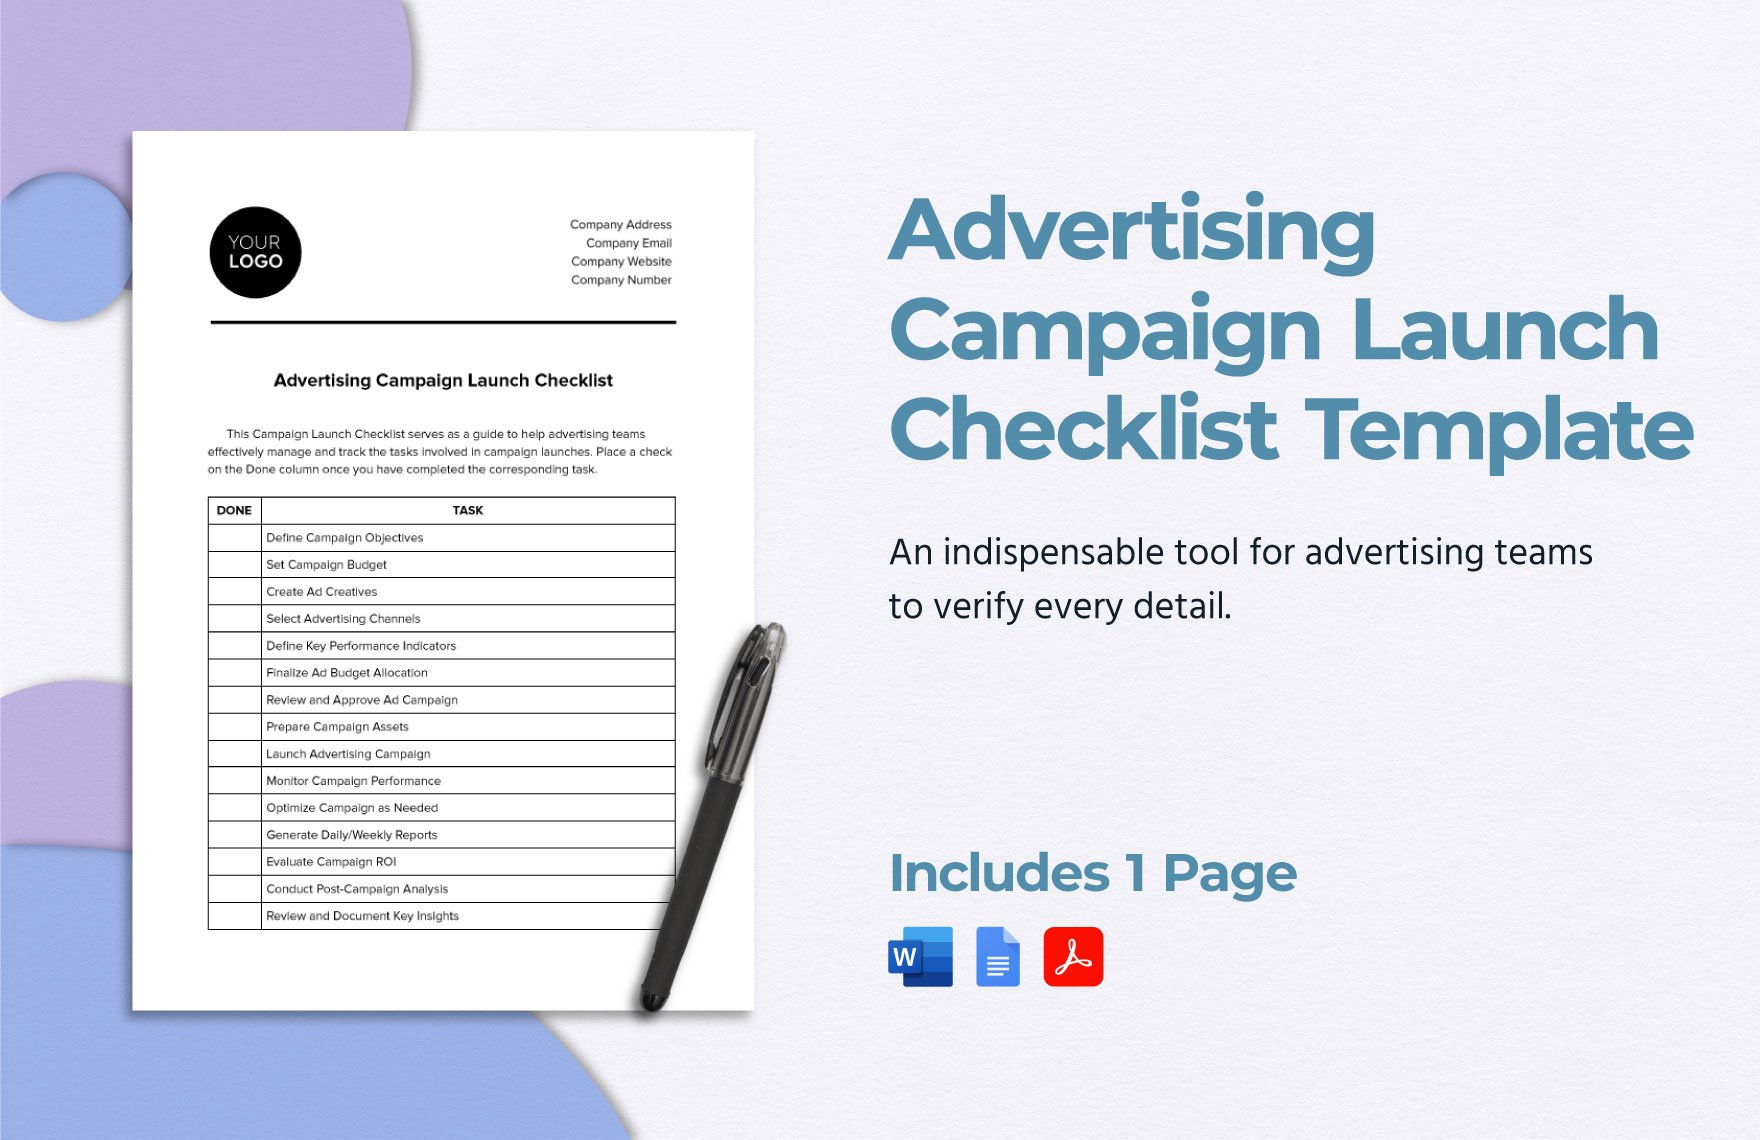 Advertising Campaign Launch Checklist Template in Word, Google Docs, PDF